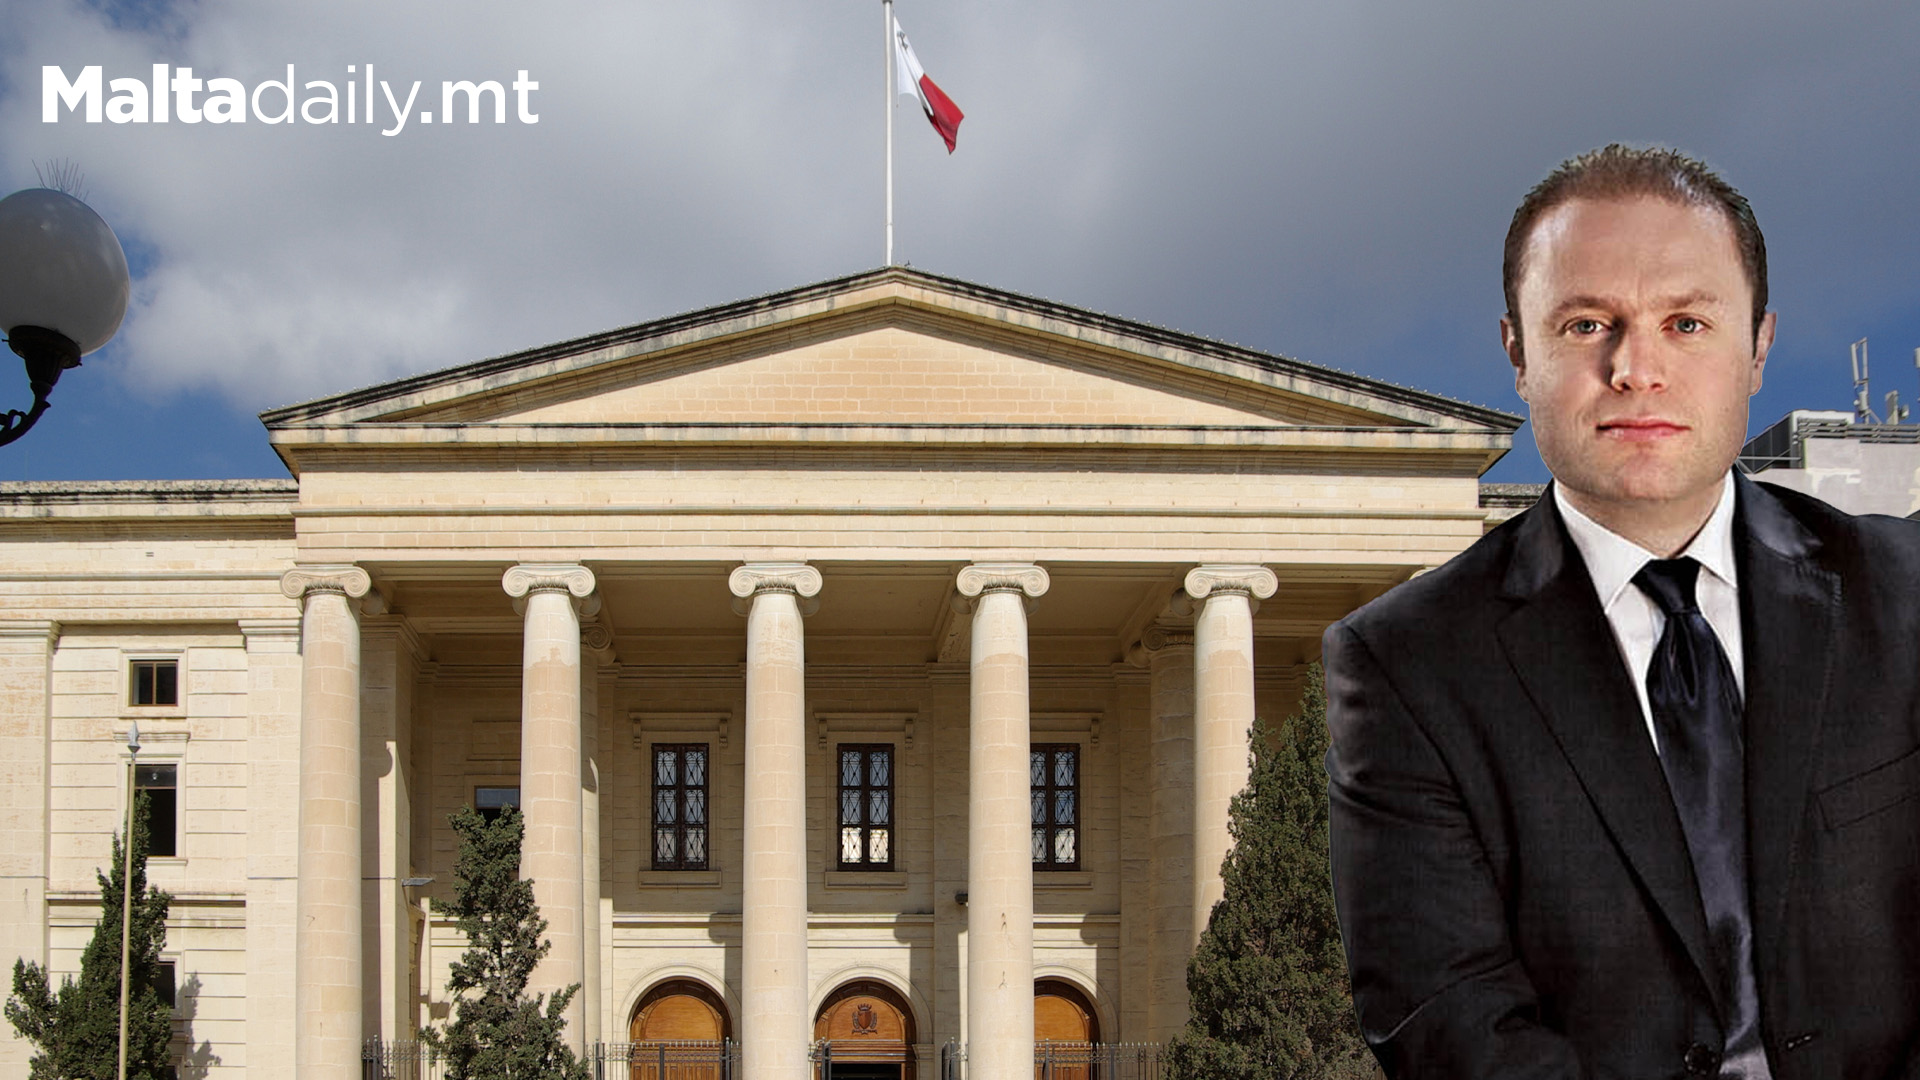 Joseph Muscat & Others To Be Charged With Money Laundering, Bribery & More